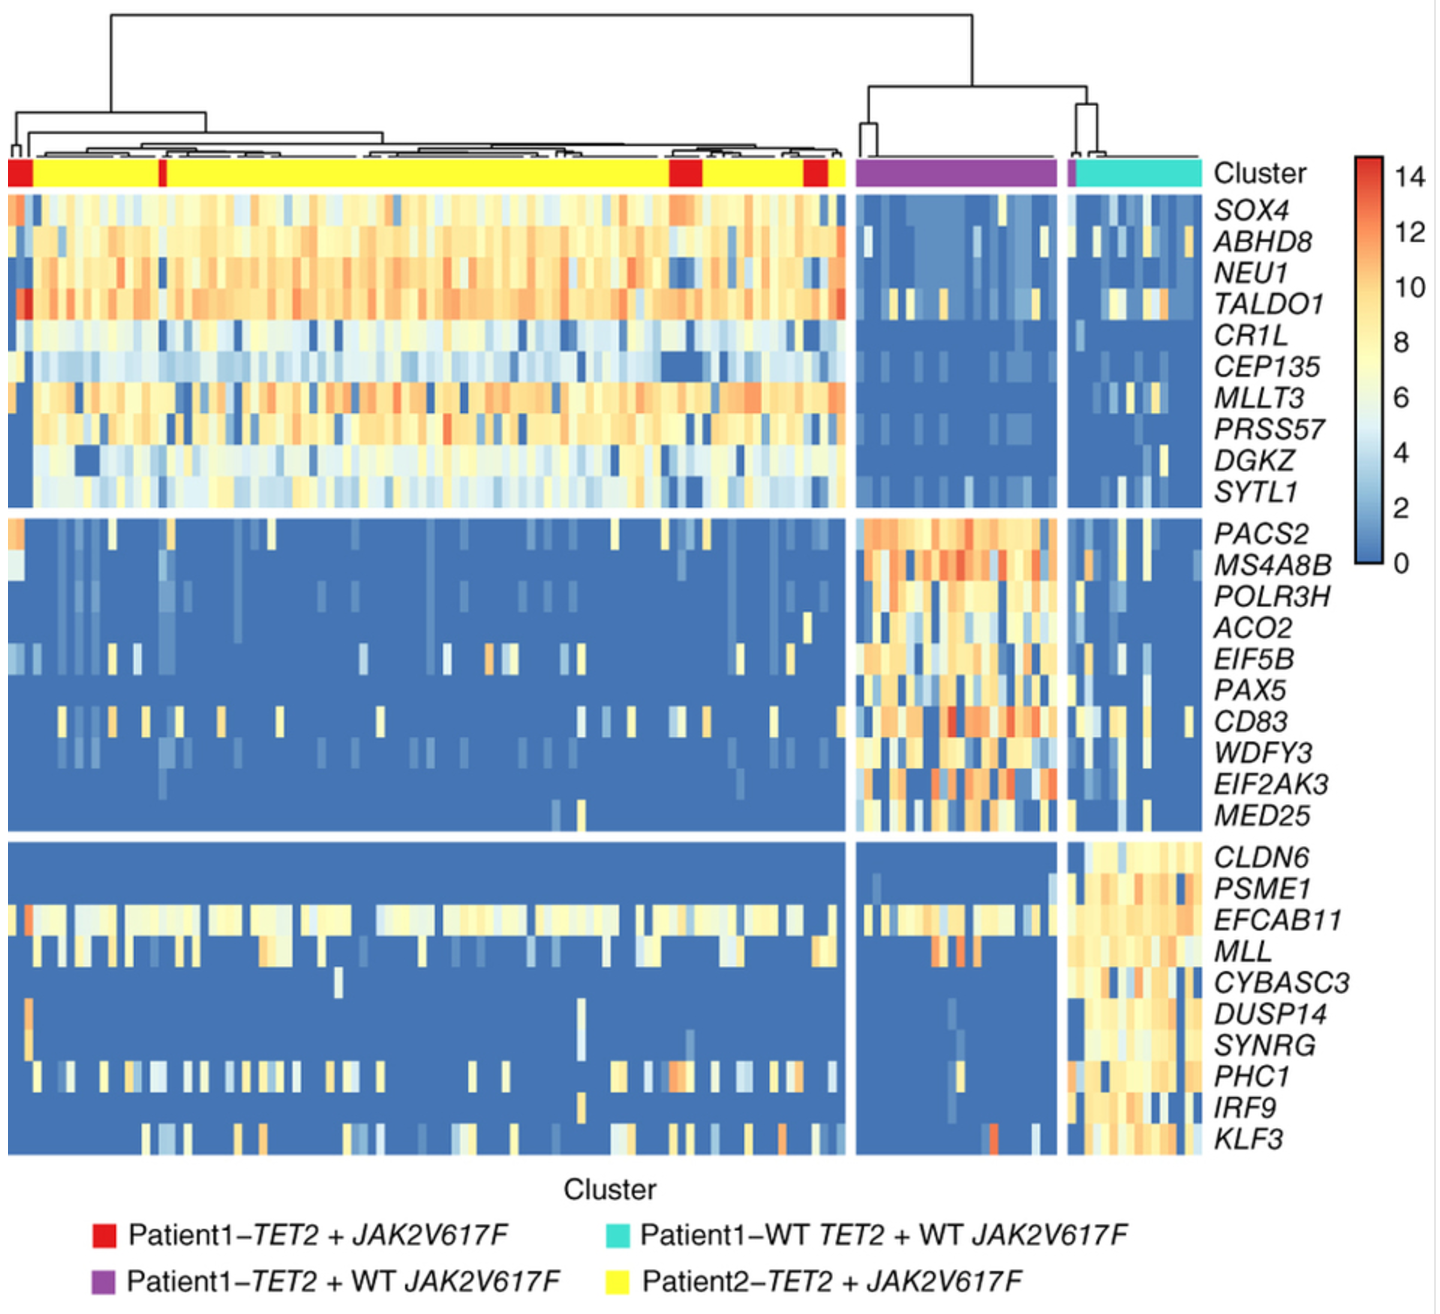 Single-cell analysis improved with consensus clustering